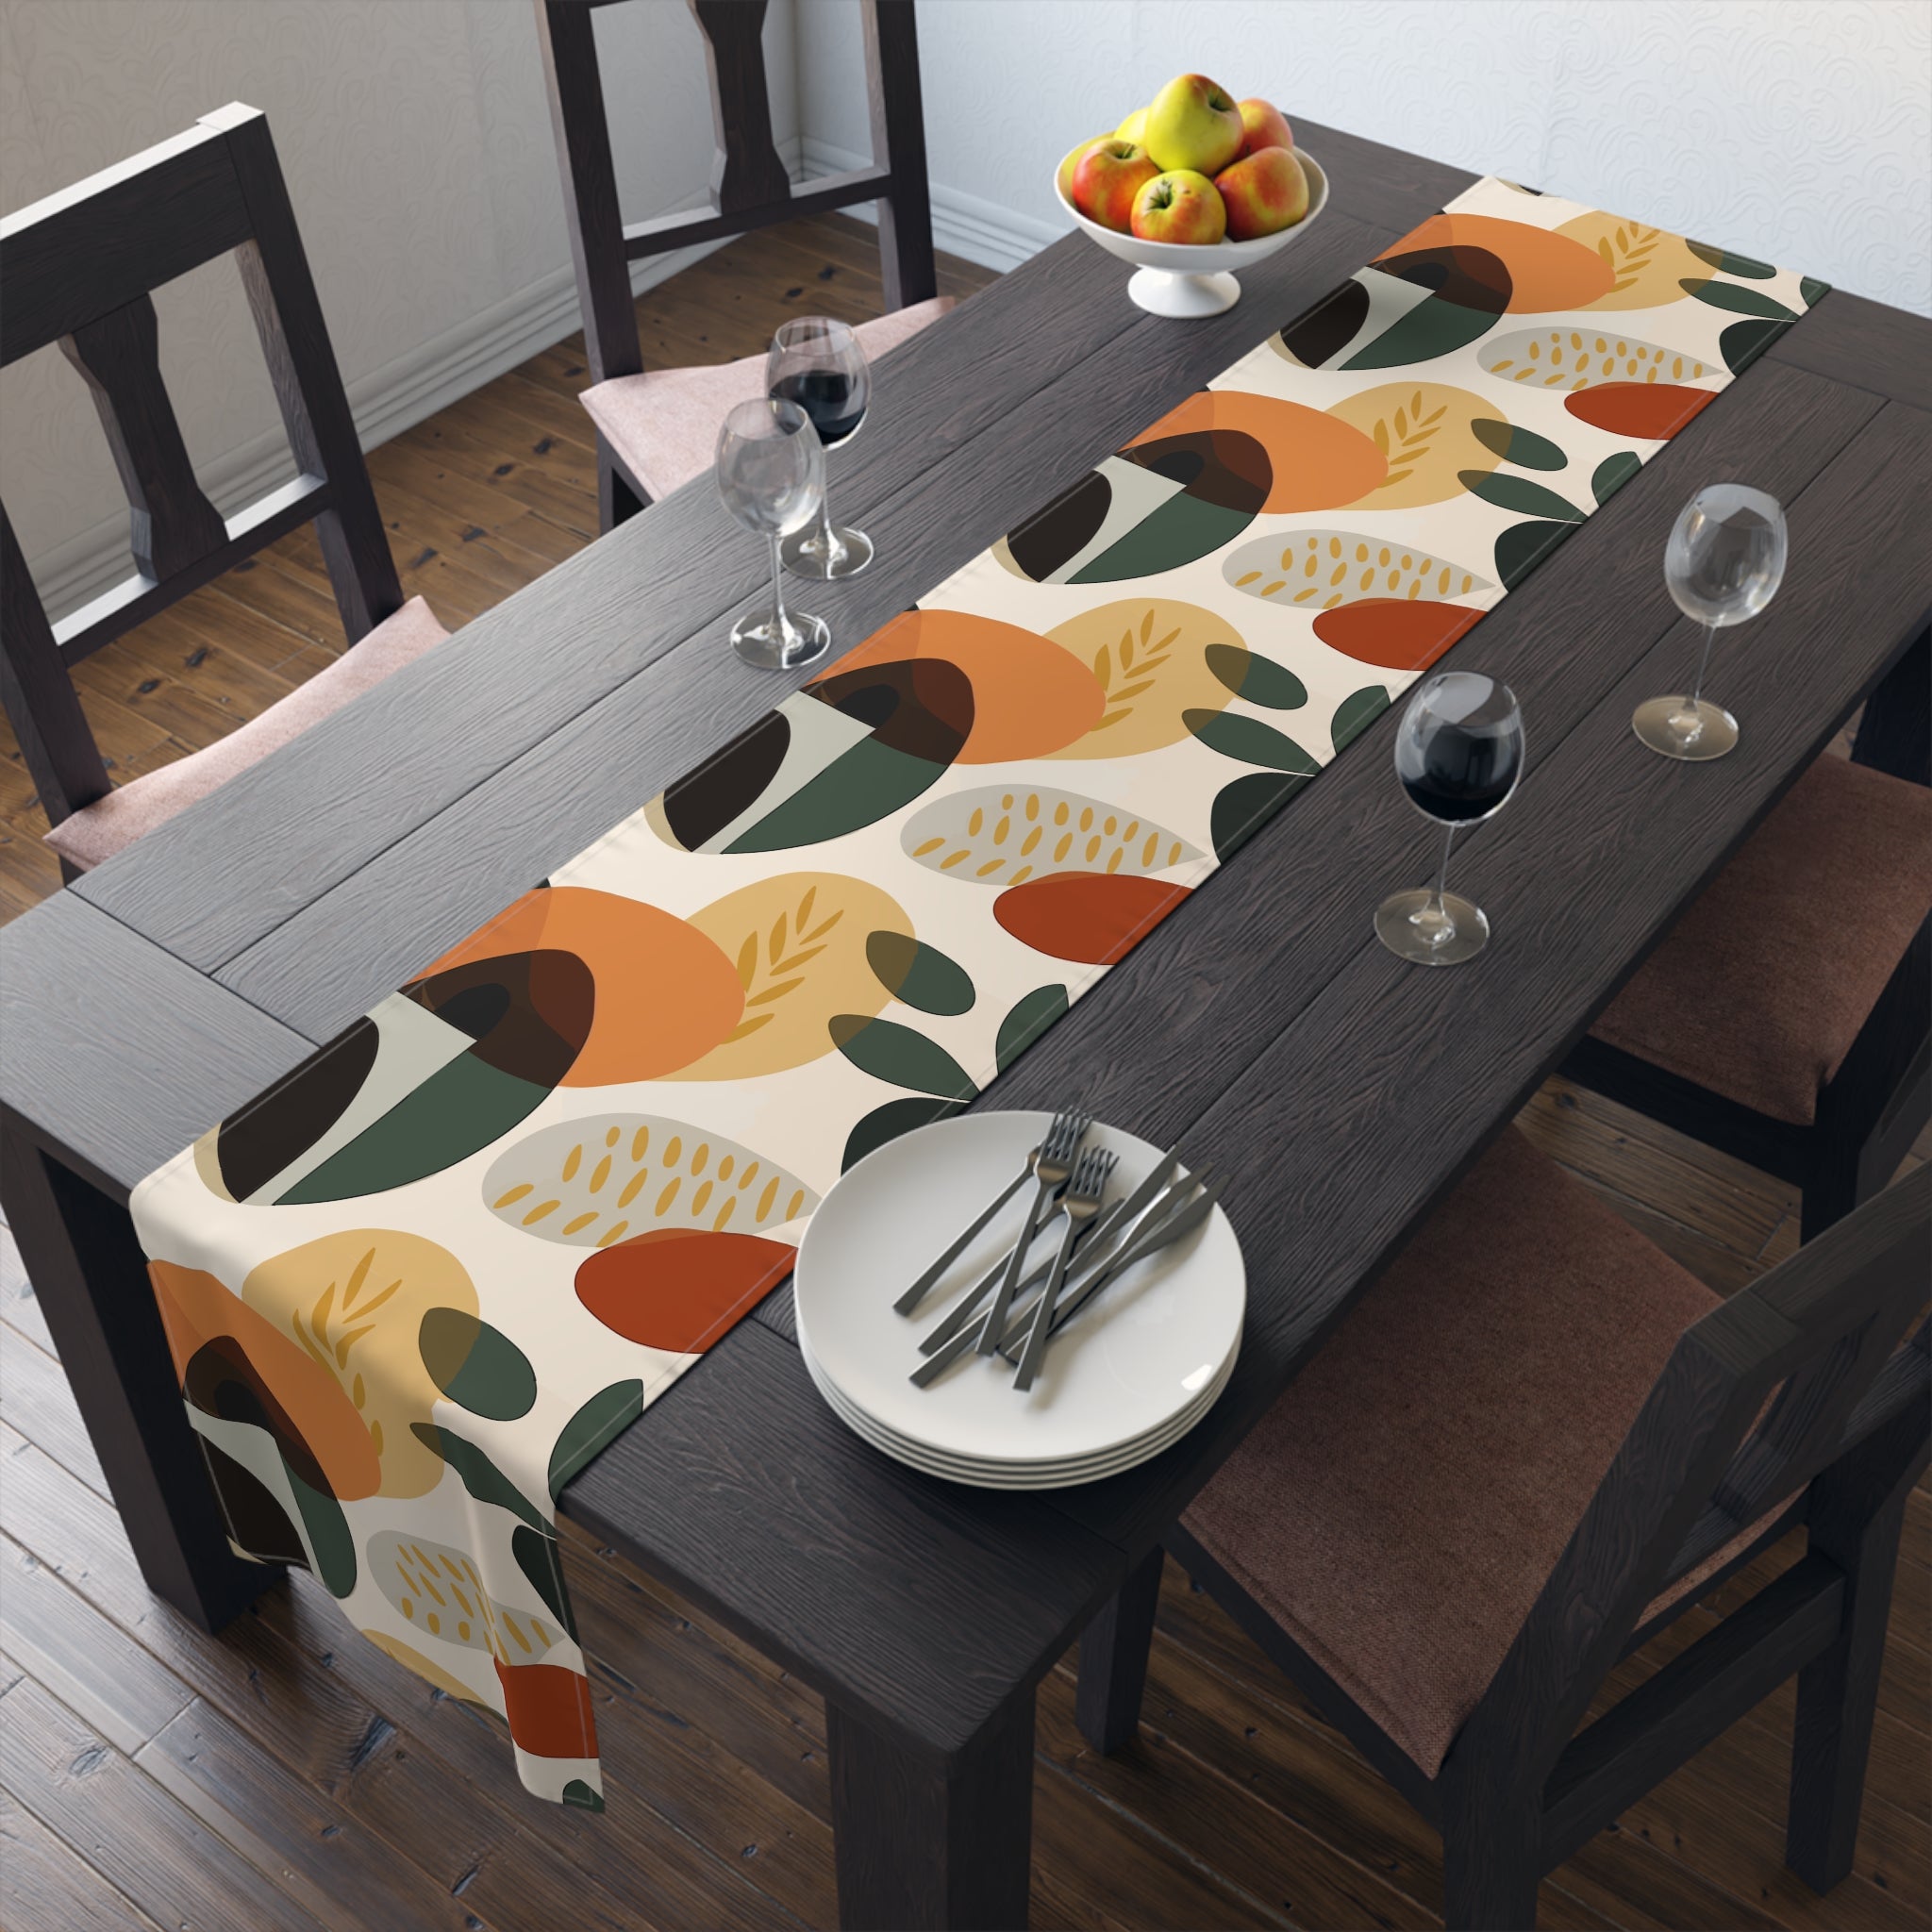 Organic Oasis: The Leaf Table Runner - My Store